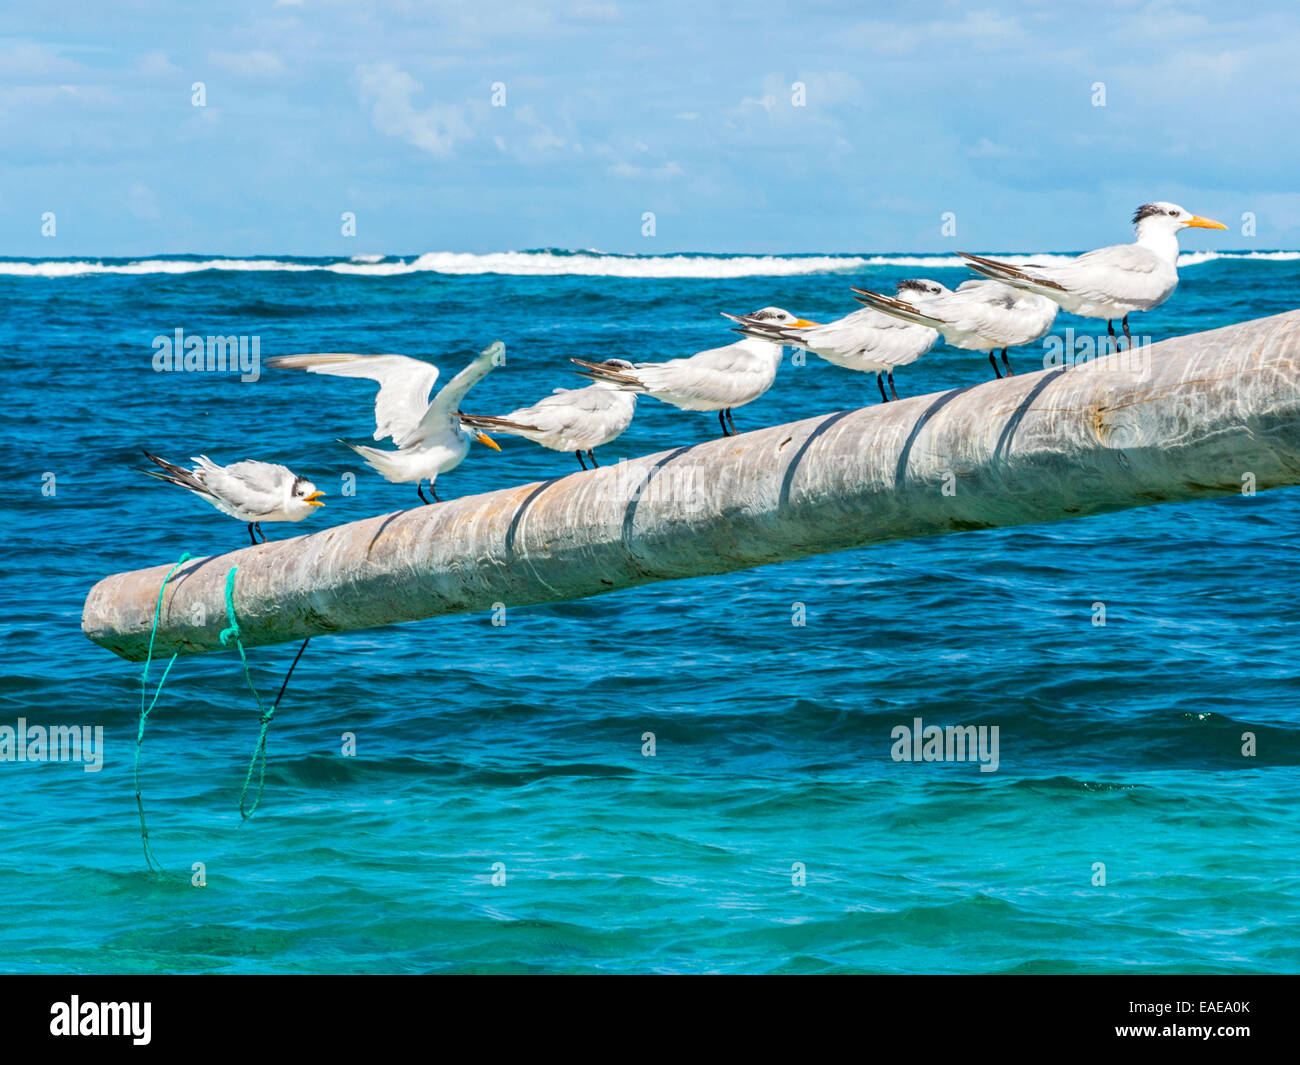 A group of Royal Terns [Thalasseus maximus] preening on a pole jutting out with the turquoise Caribbean sea in the background. Stock Photo